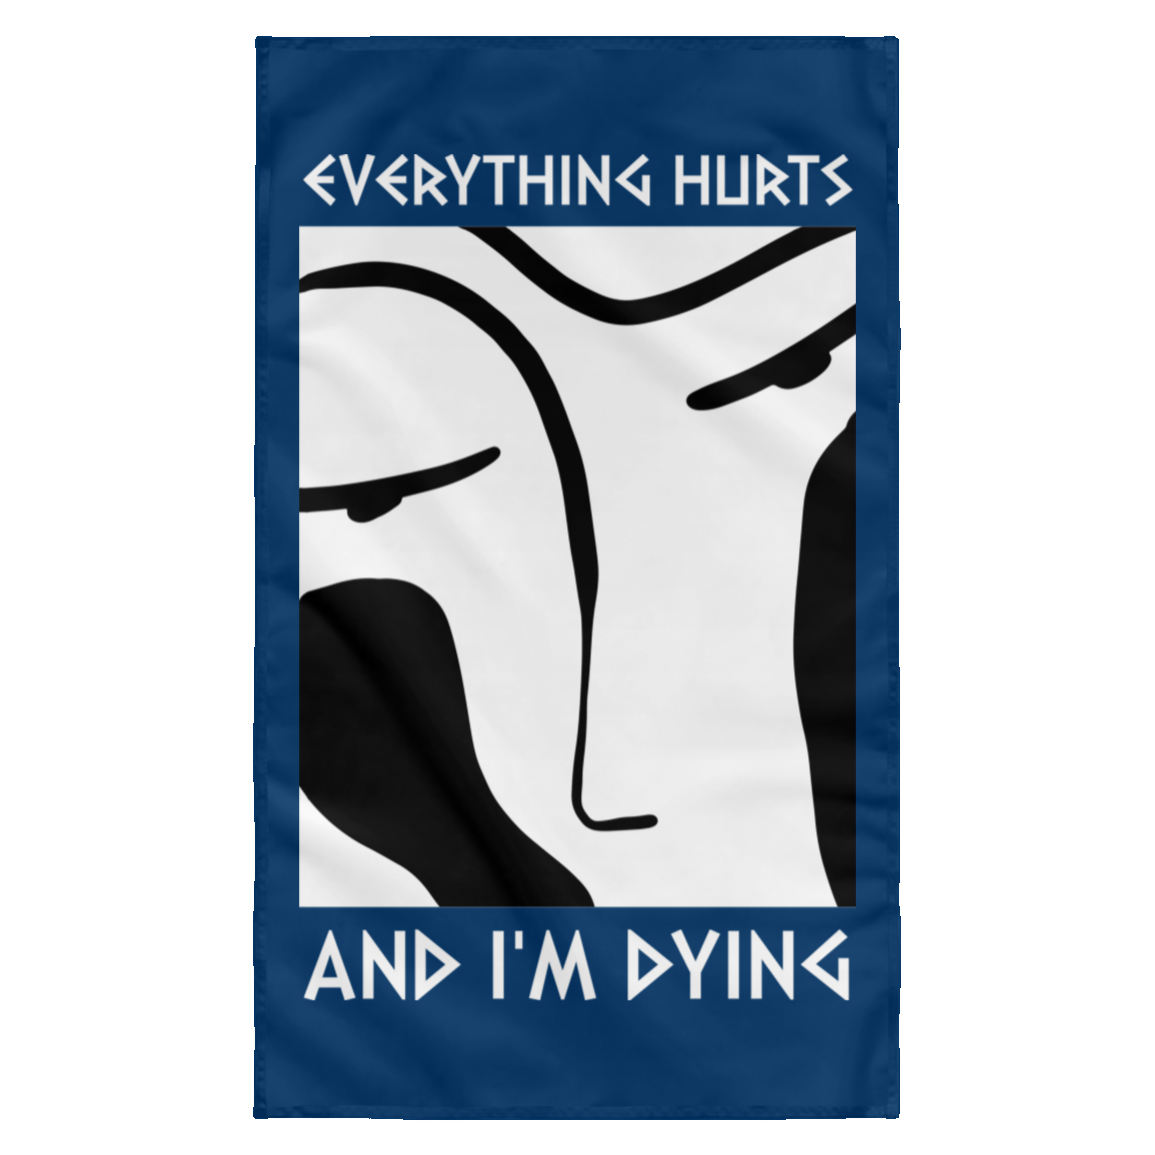 Everything Hurts Tapestry